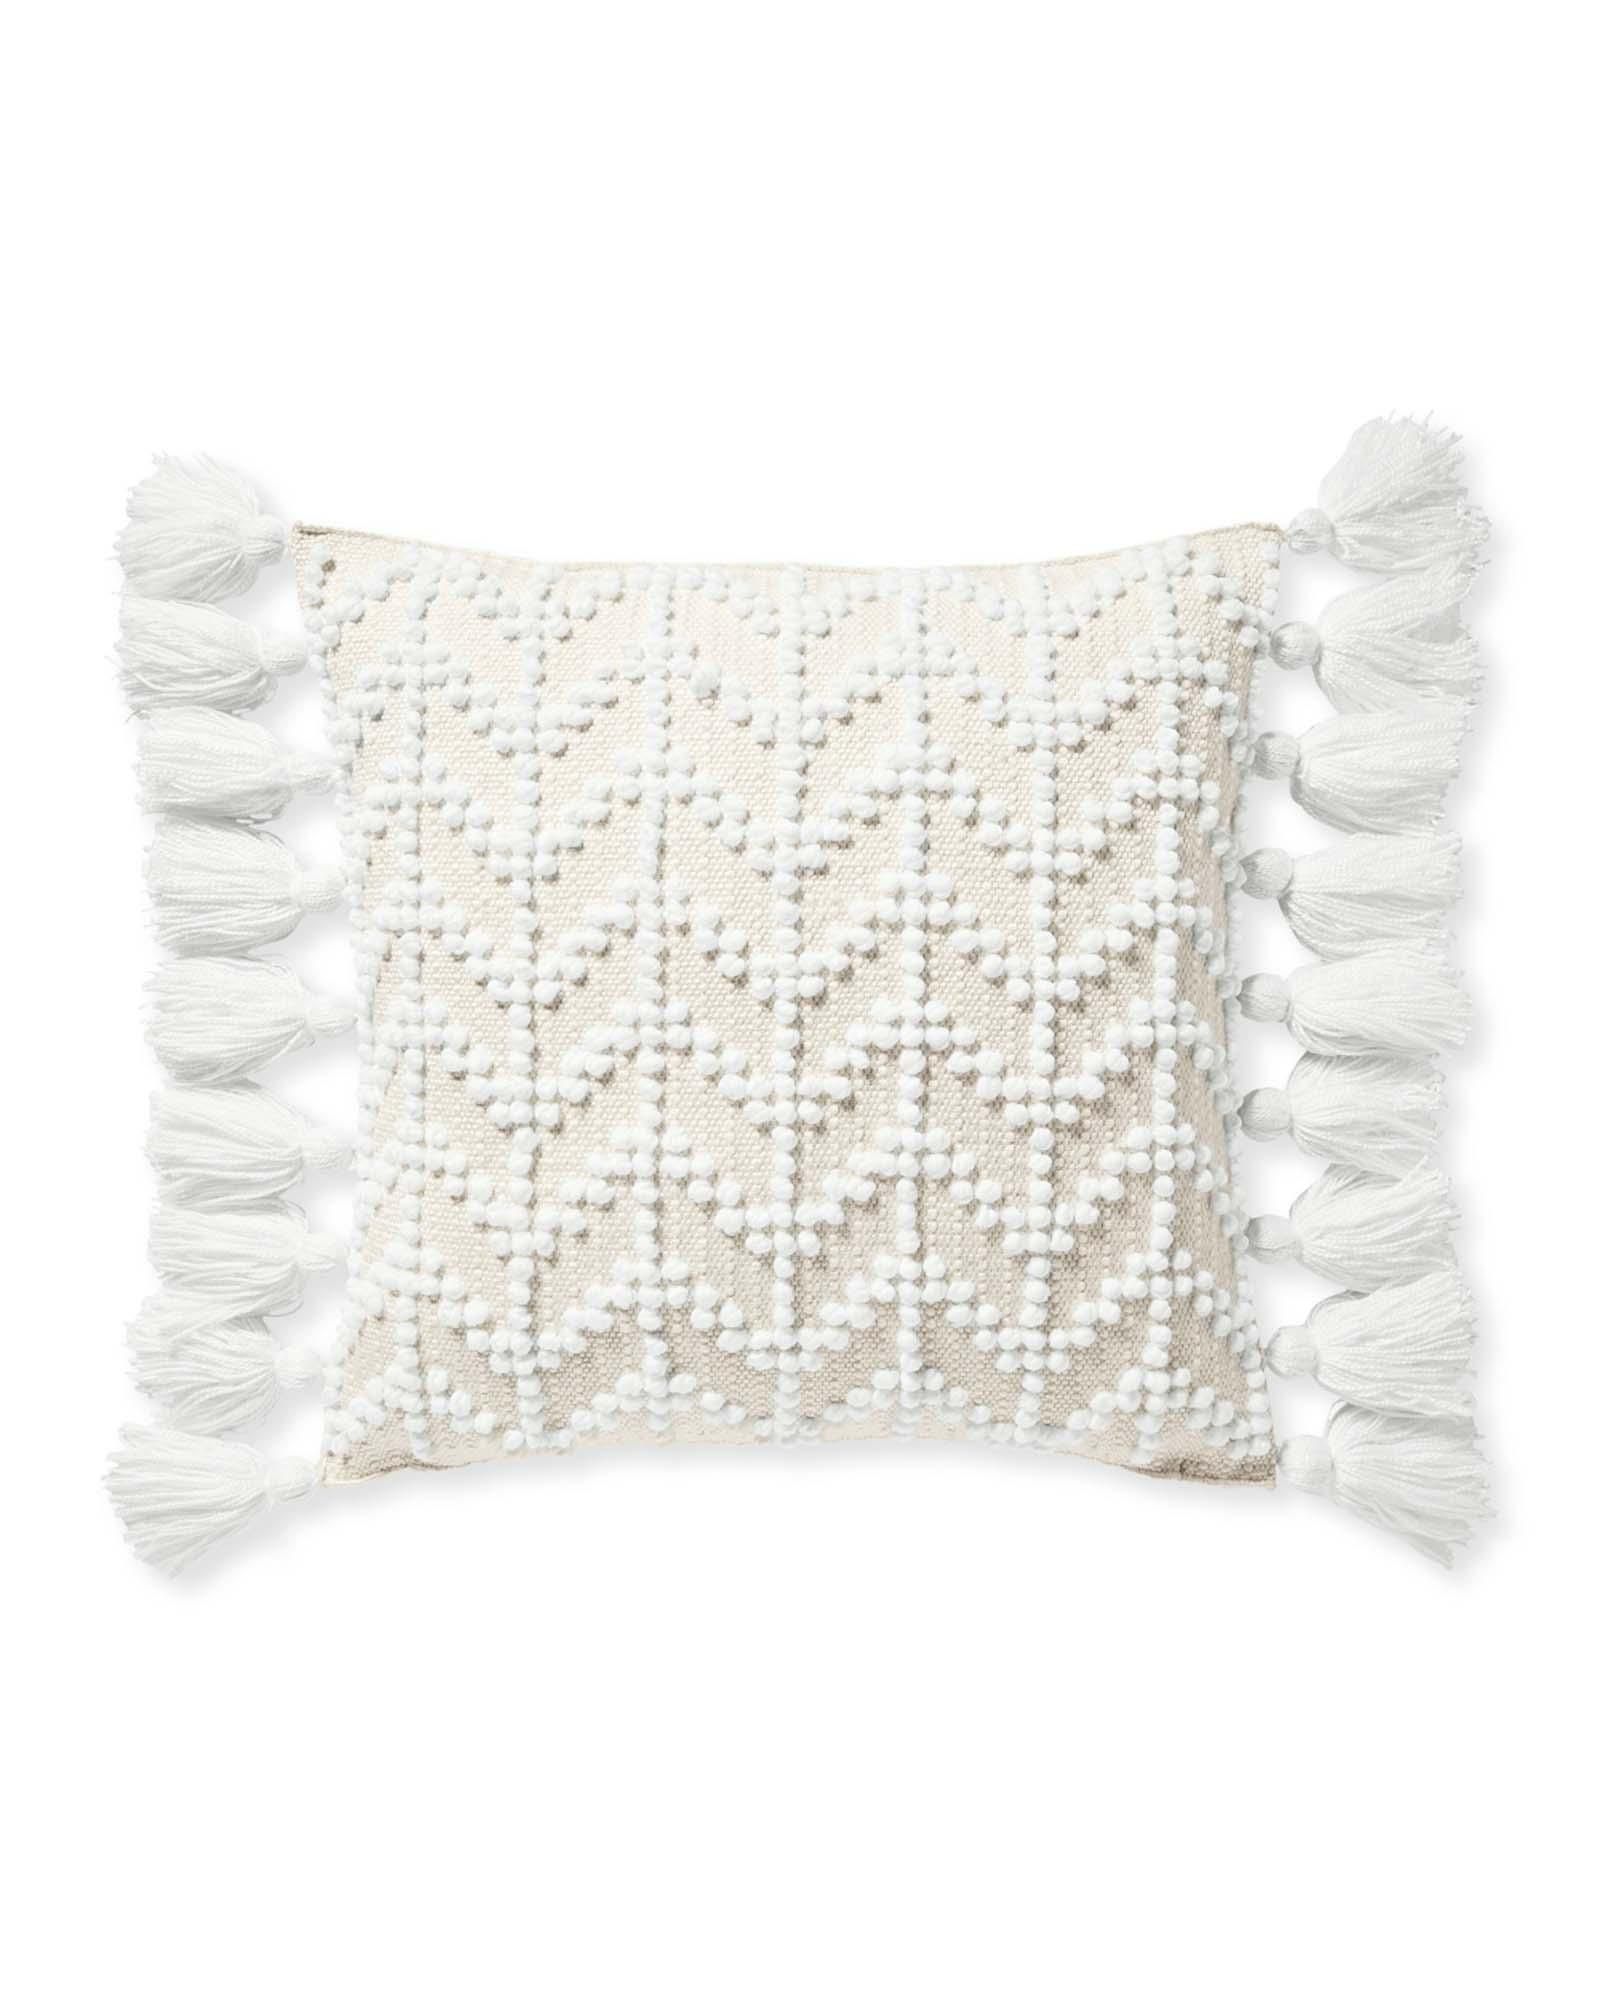 West Beach Pillow Cover | Serena and Lily